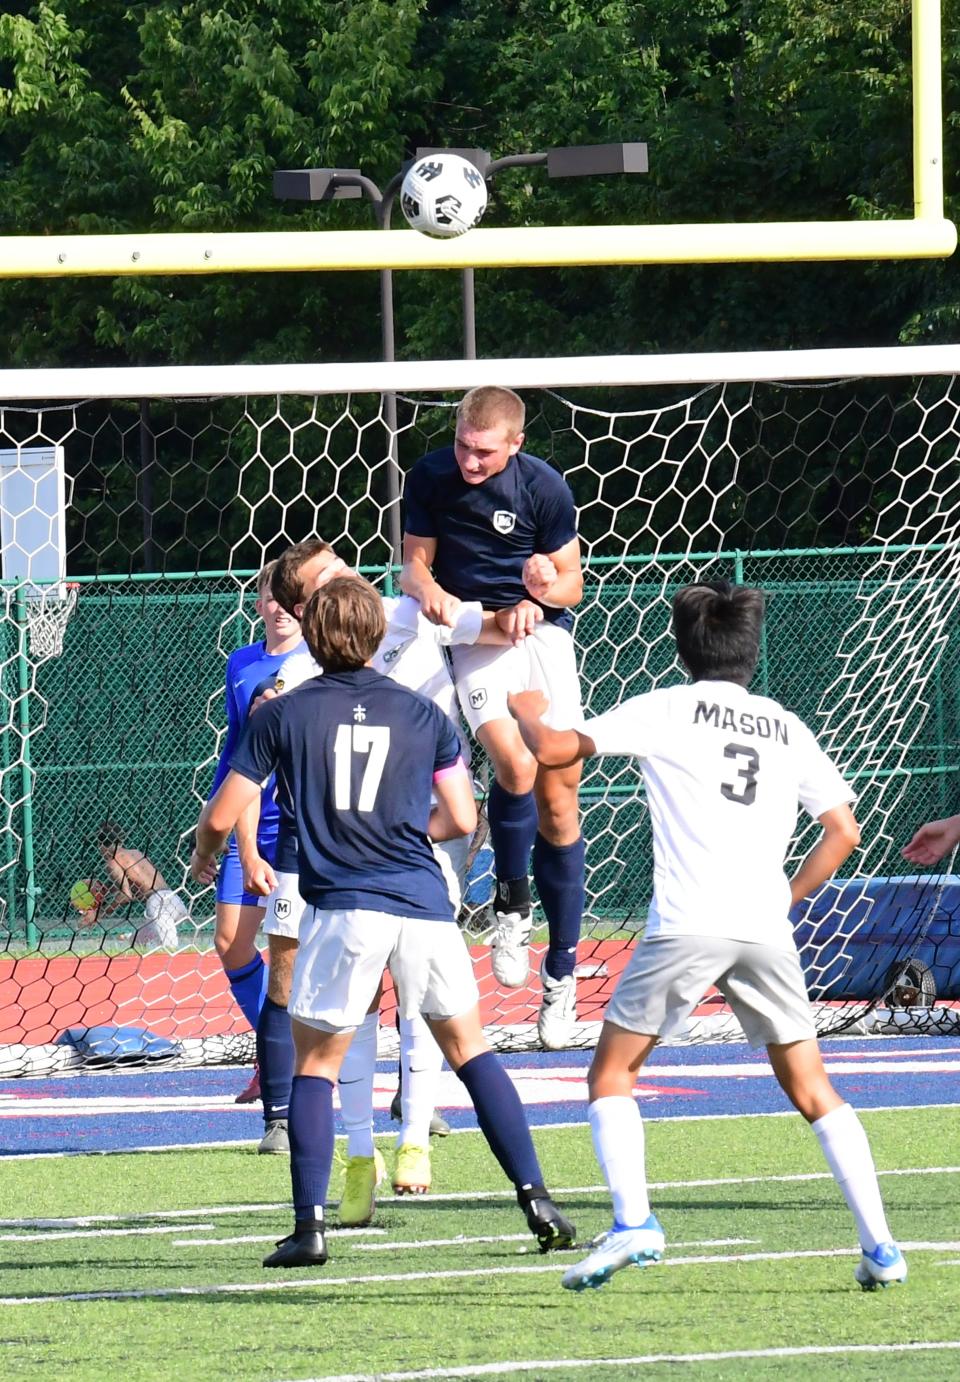 Moeller's Maddox Miller, shown defending the goal with a header, has been voted one of the top boys soccer players in Ohio in 2023.